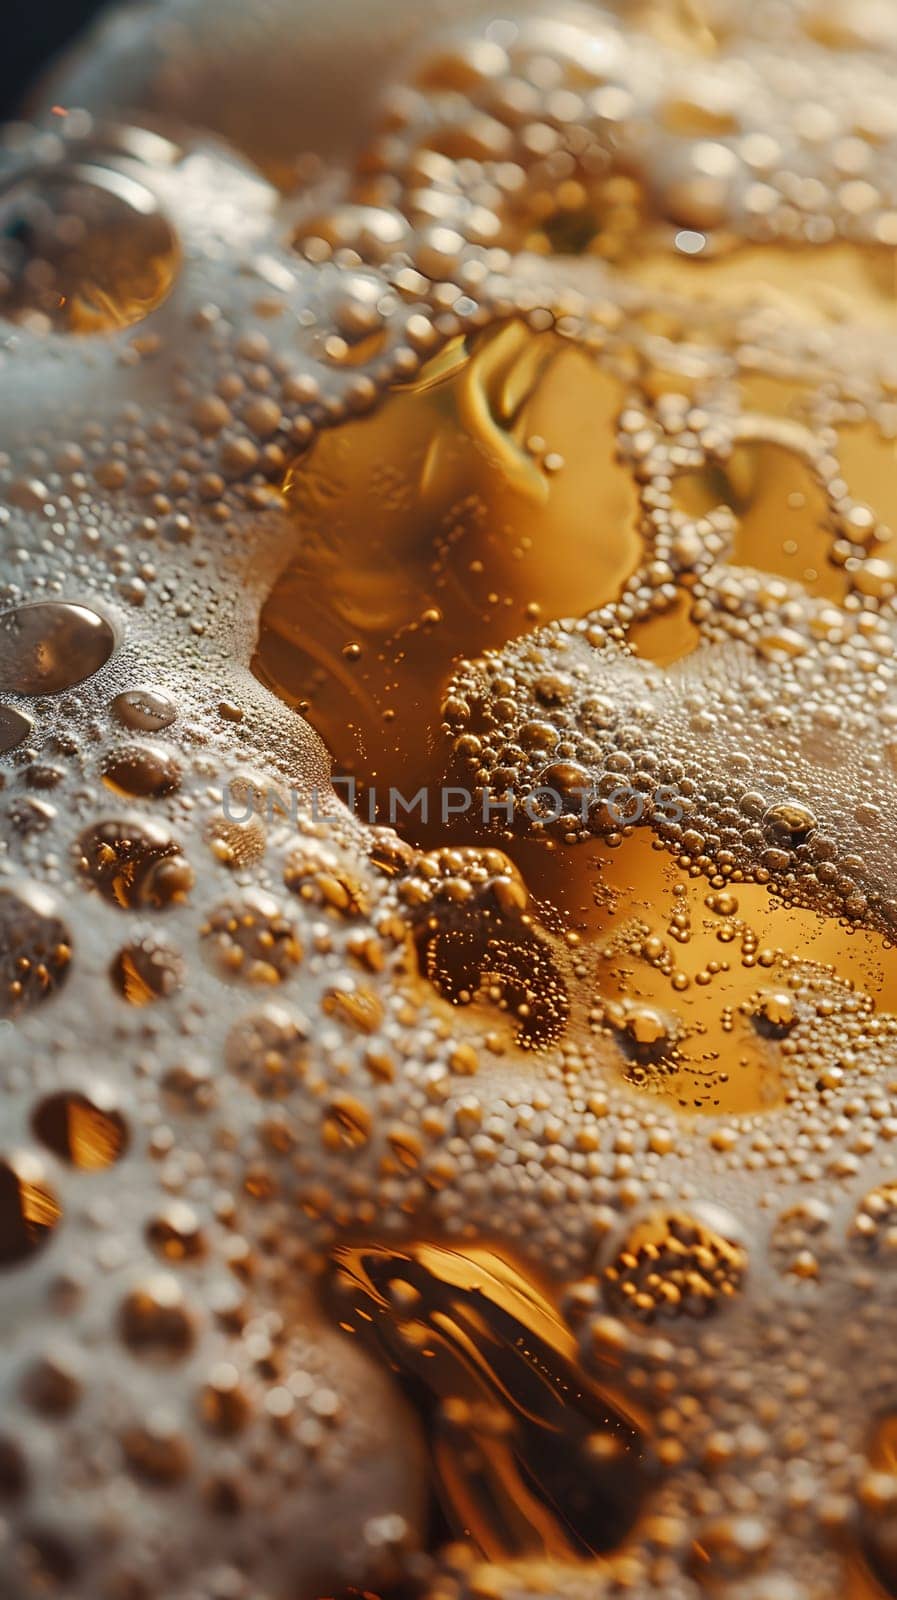 A detailed macro photography shot showcasing the bubbles escaping from a glass of beer, with intricate patterns and reflections of wood and metal